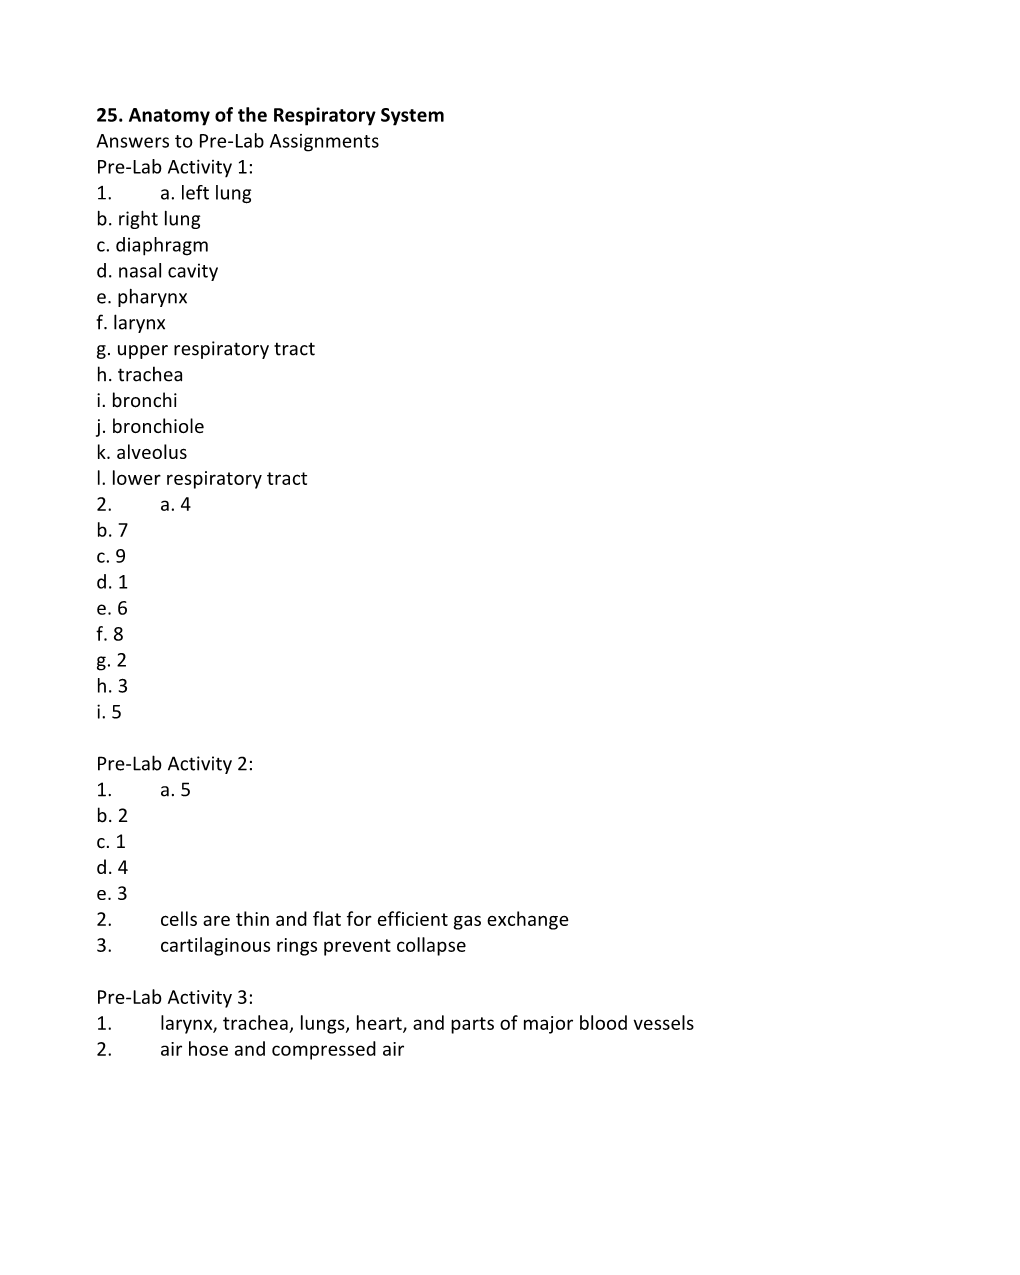 25. Anatomy of the Respiratory System Answers to Pre-Lab Assignments Pre-Lab Activity 1: 1